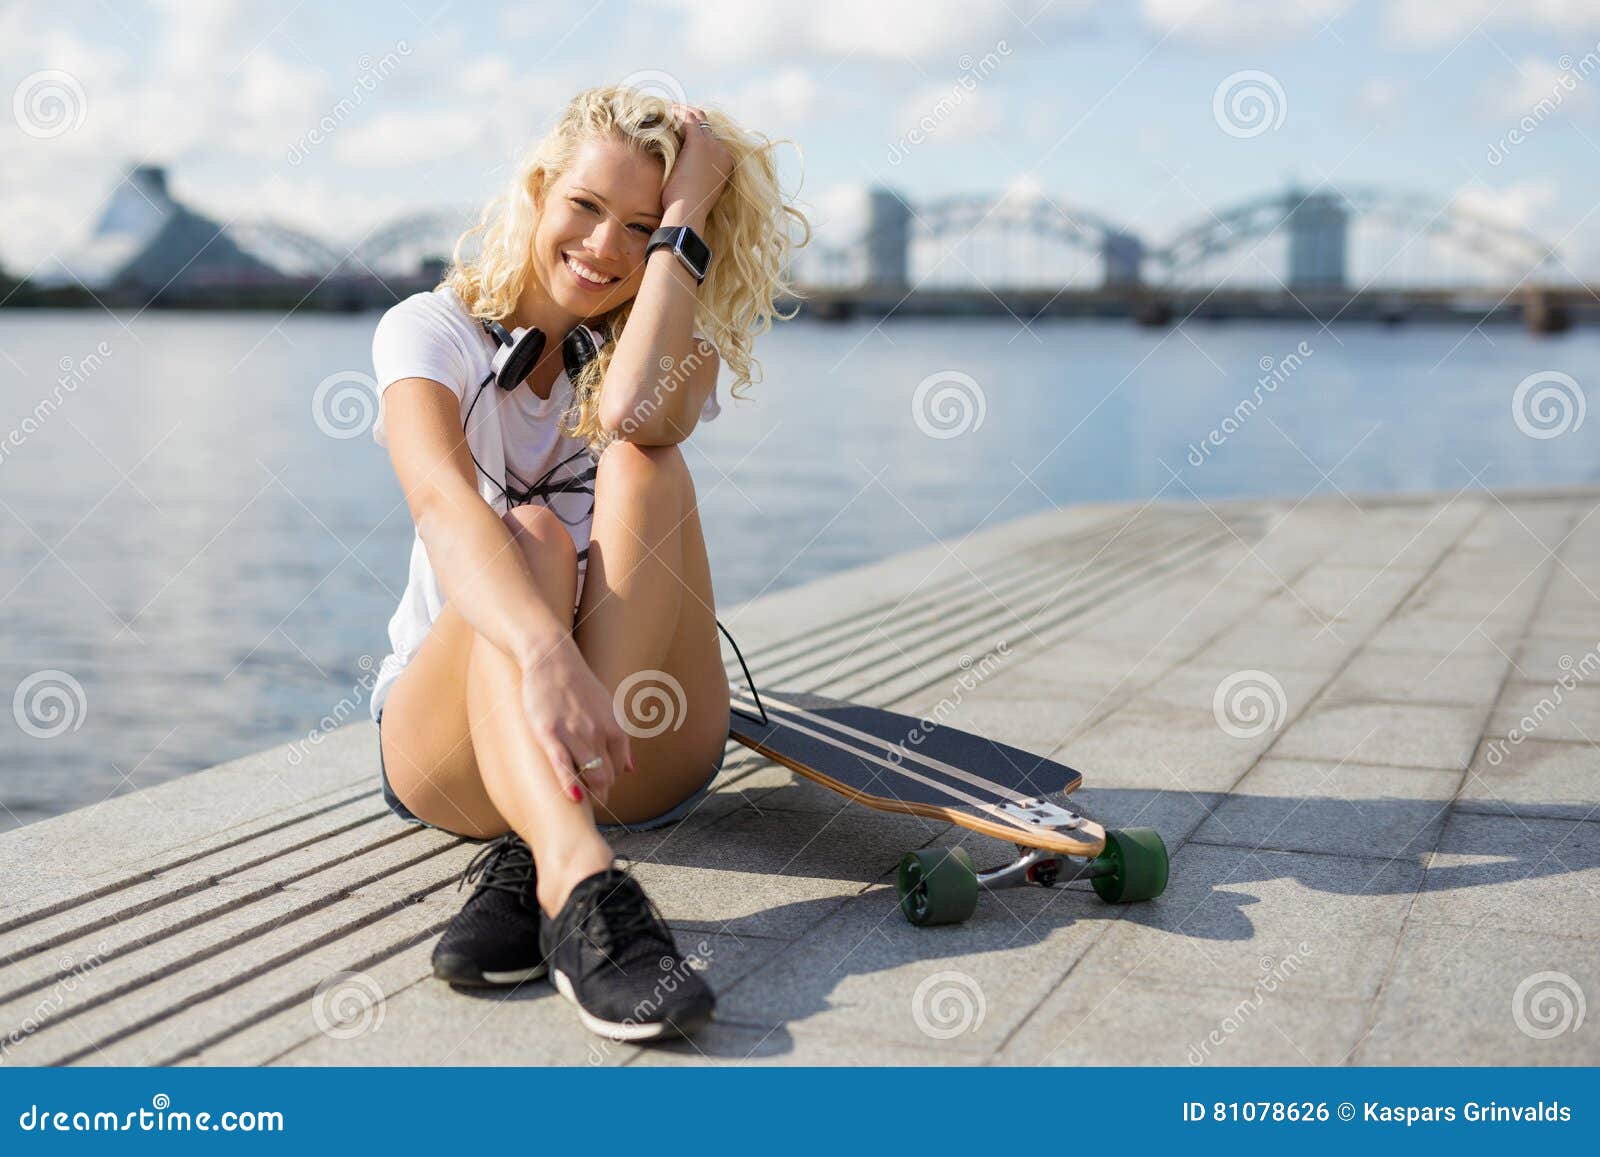 woman in city sitting on pavement with longboard